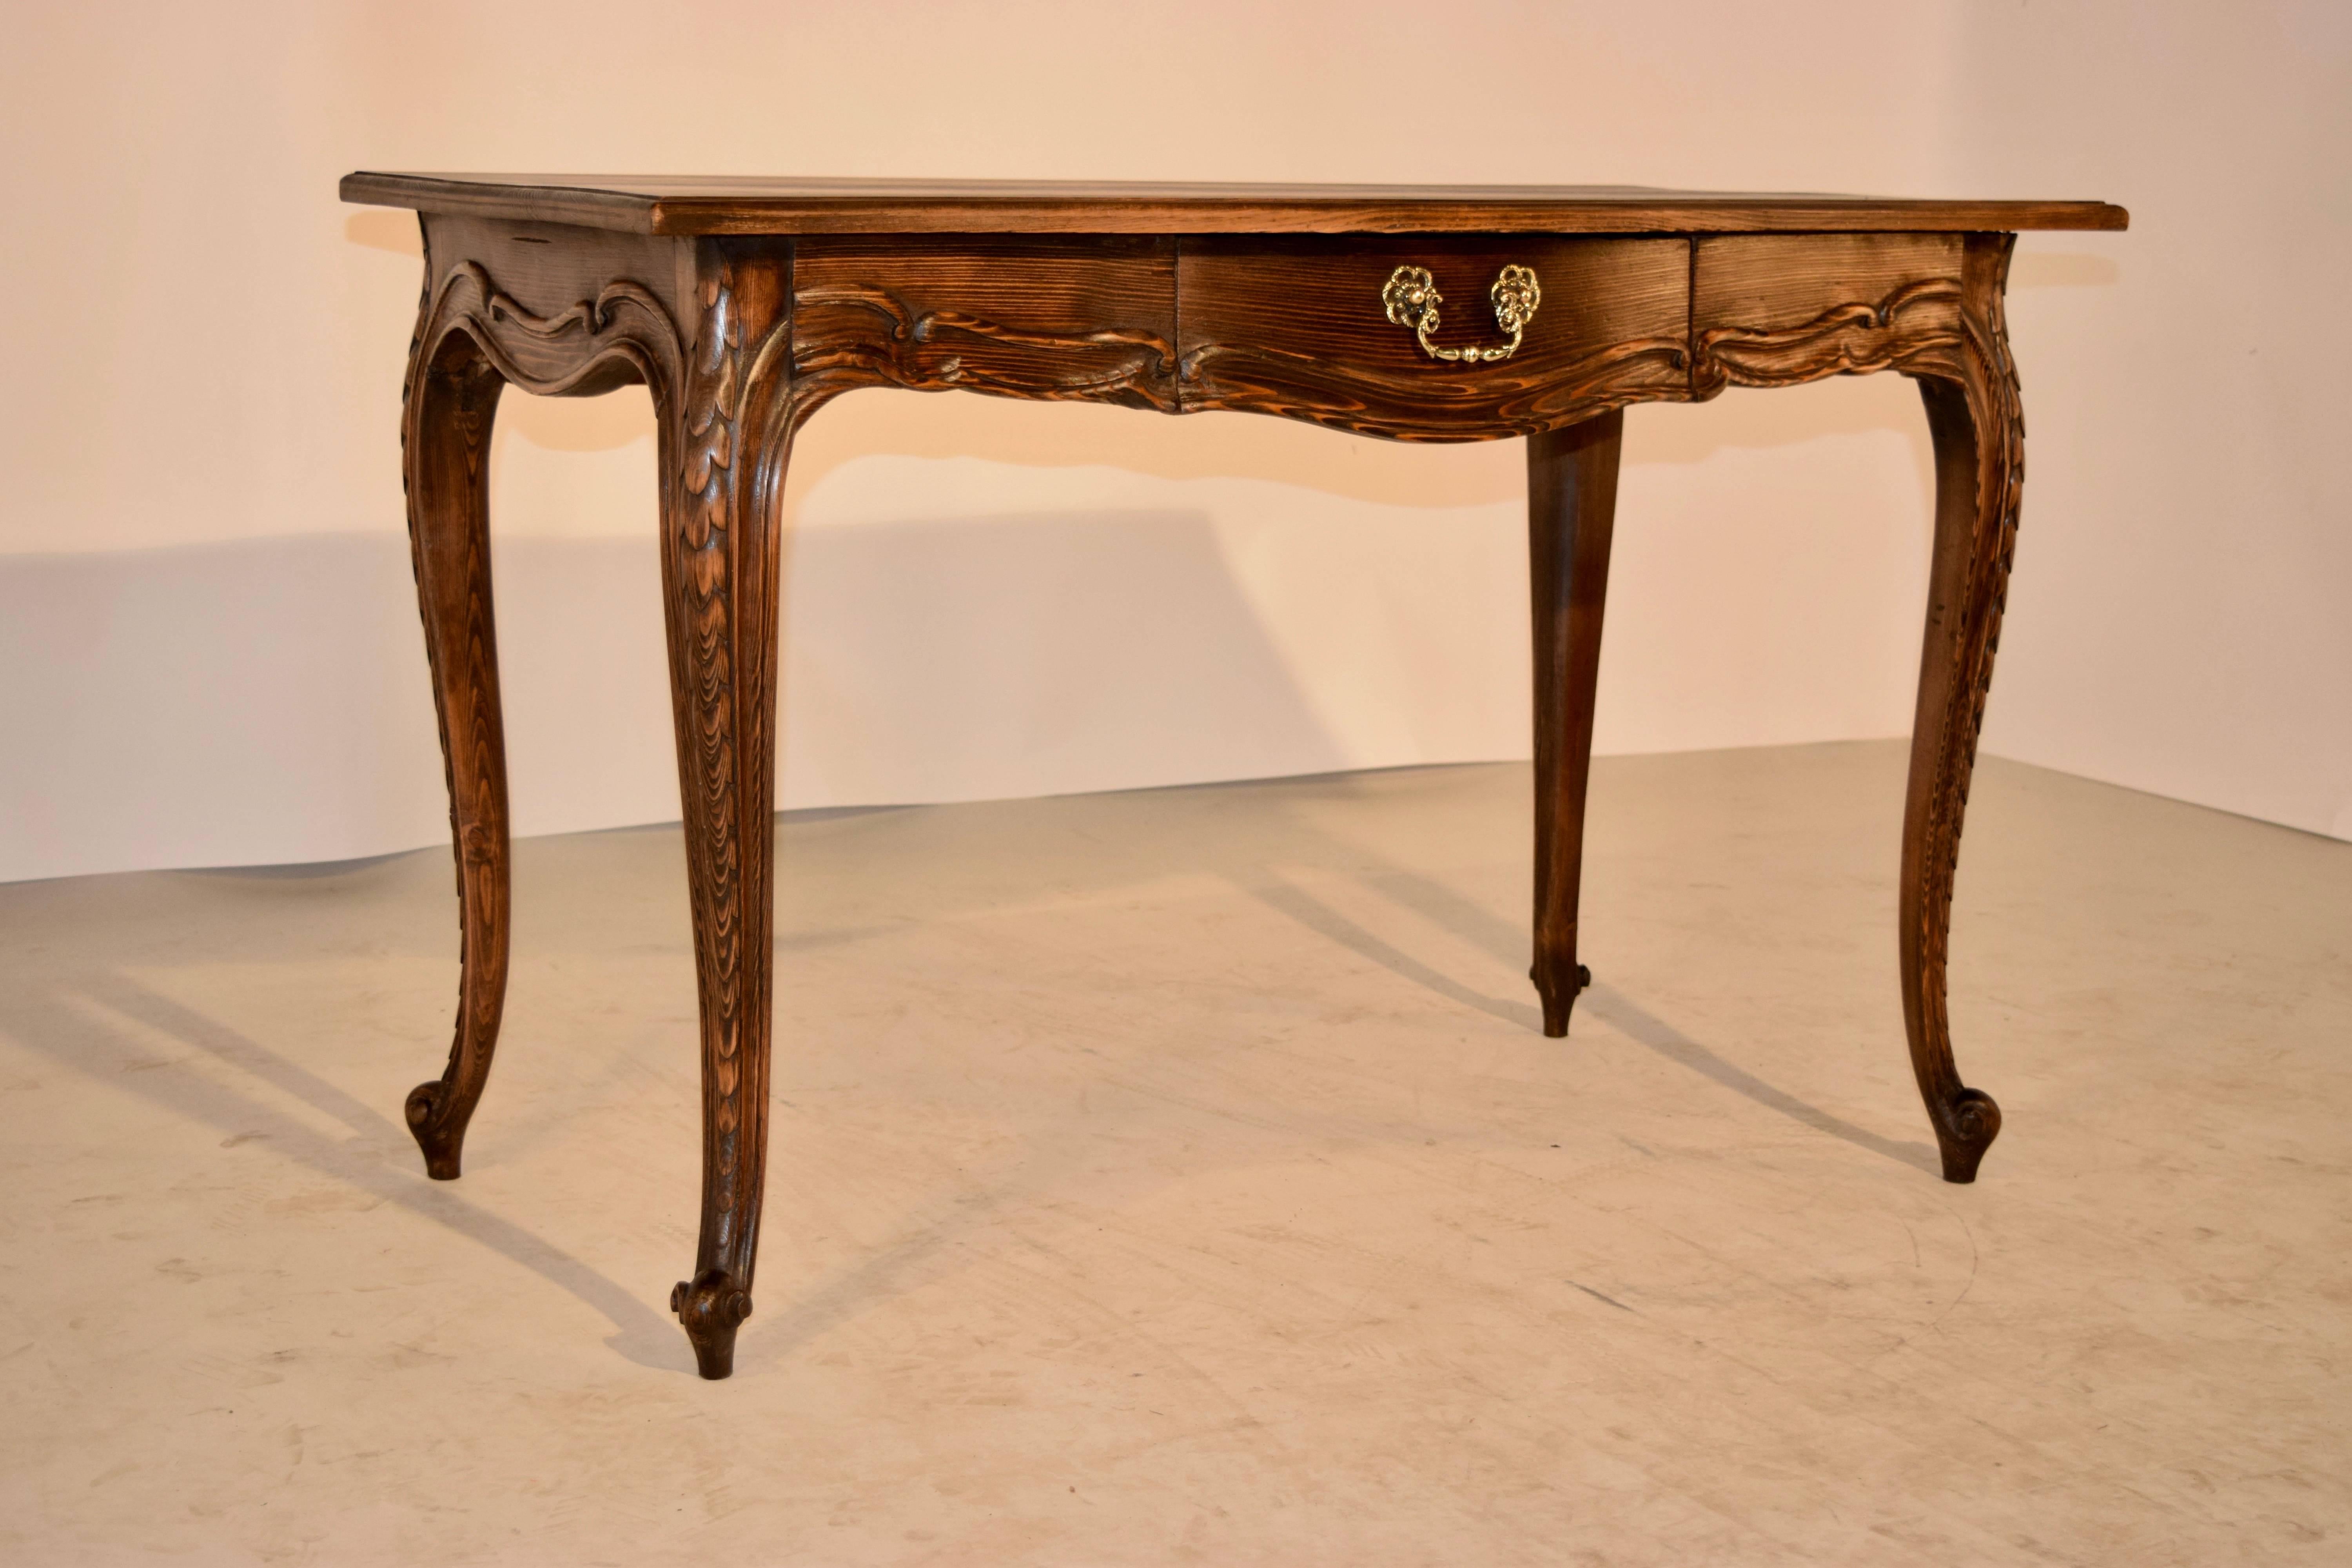 19th century French pine side table with a shaped top which has a bevelled edge, following down to a scalloped apron, which has a carved border and a single drawer in the front. The legs are cabriole and are hand-carved decorated down the sides,